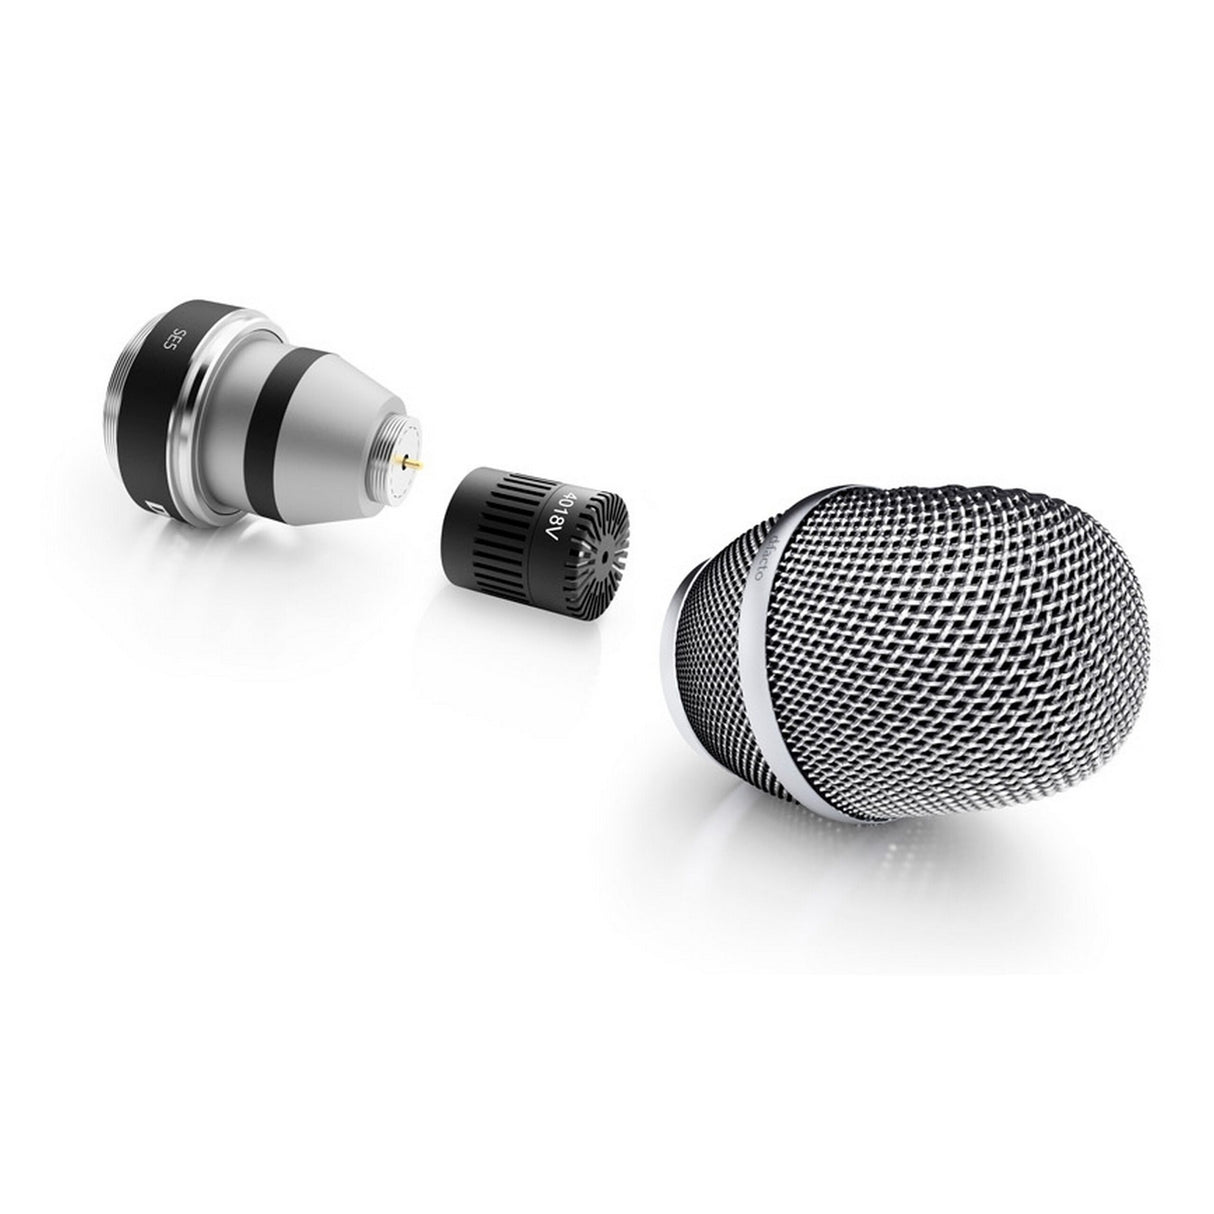 DPA 4018V-N-SE5 d:facto Softboost Supercardioid Handheld Microphone Capsule, Nickel, SE5 Adapter Compatible with Sennheiser 5200 Transmitters